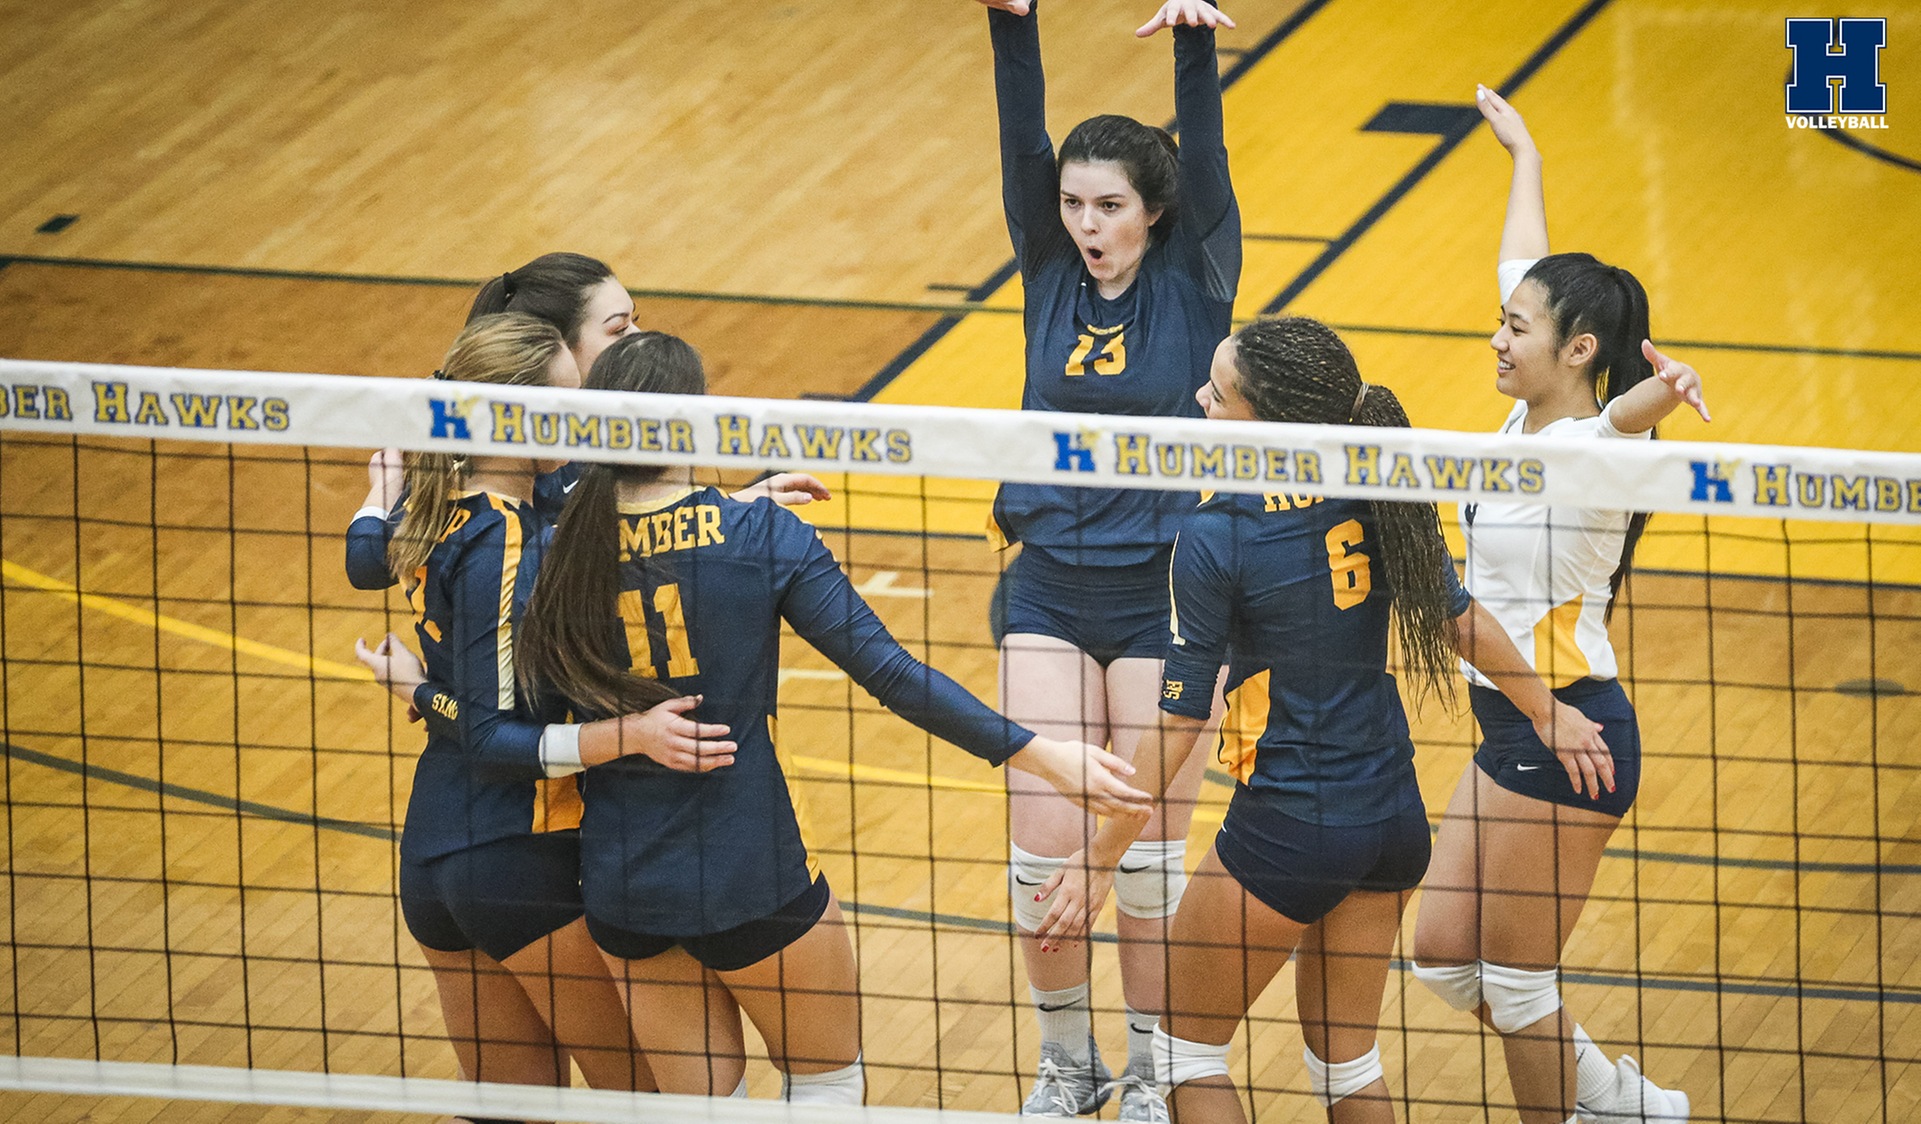 Another Sweep for No. 15 Women's Volleyball Over Boréal